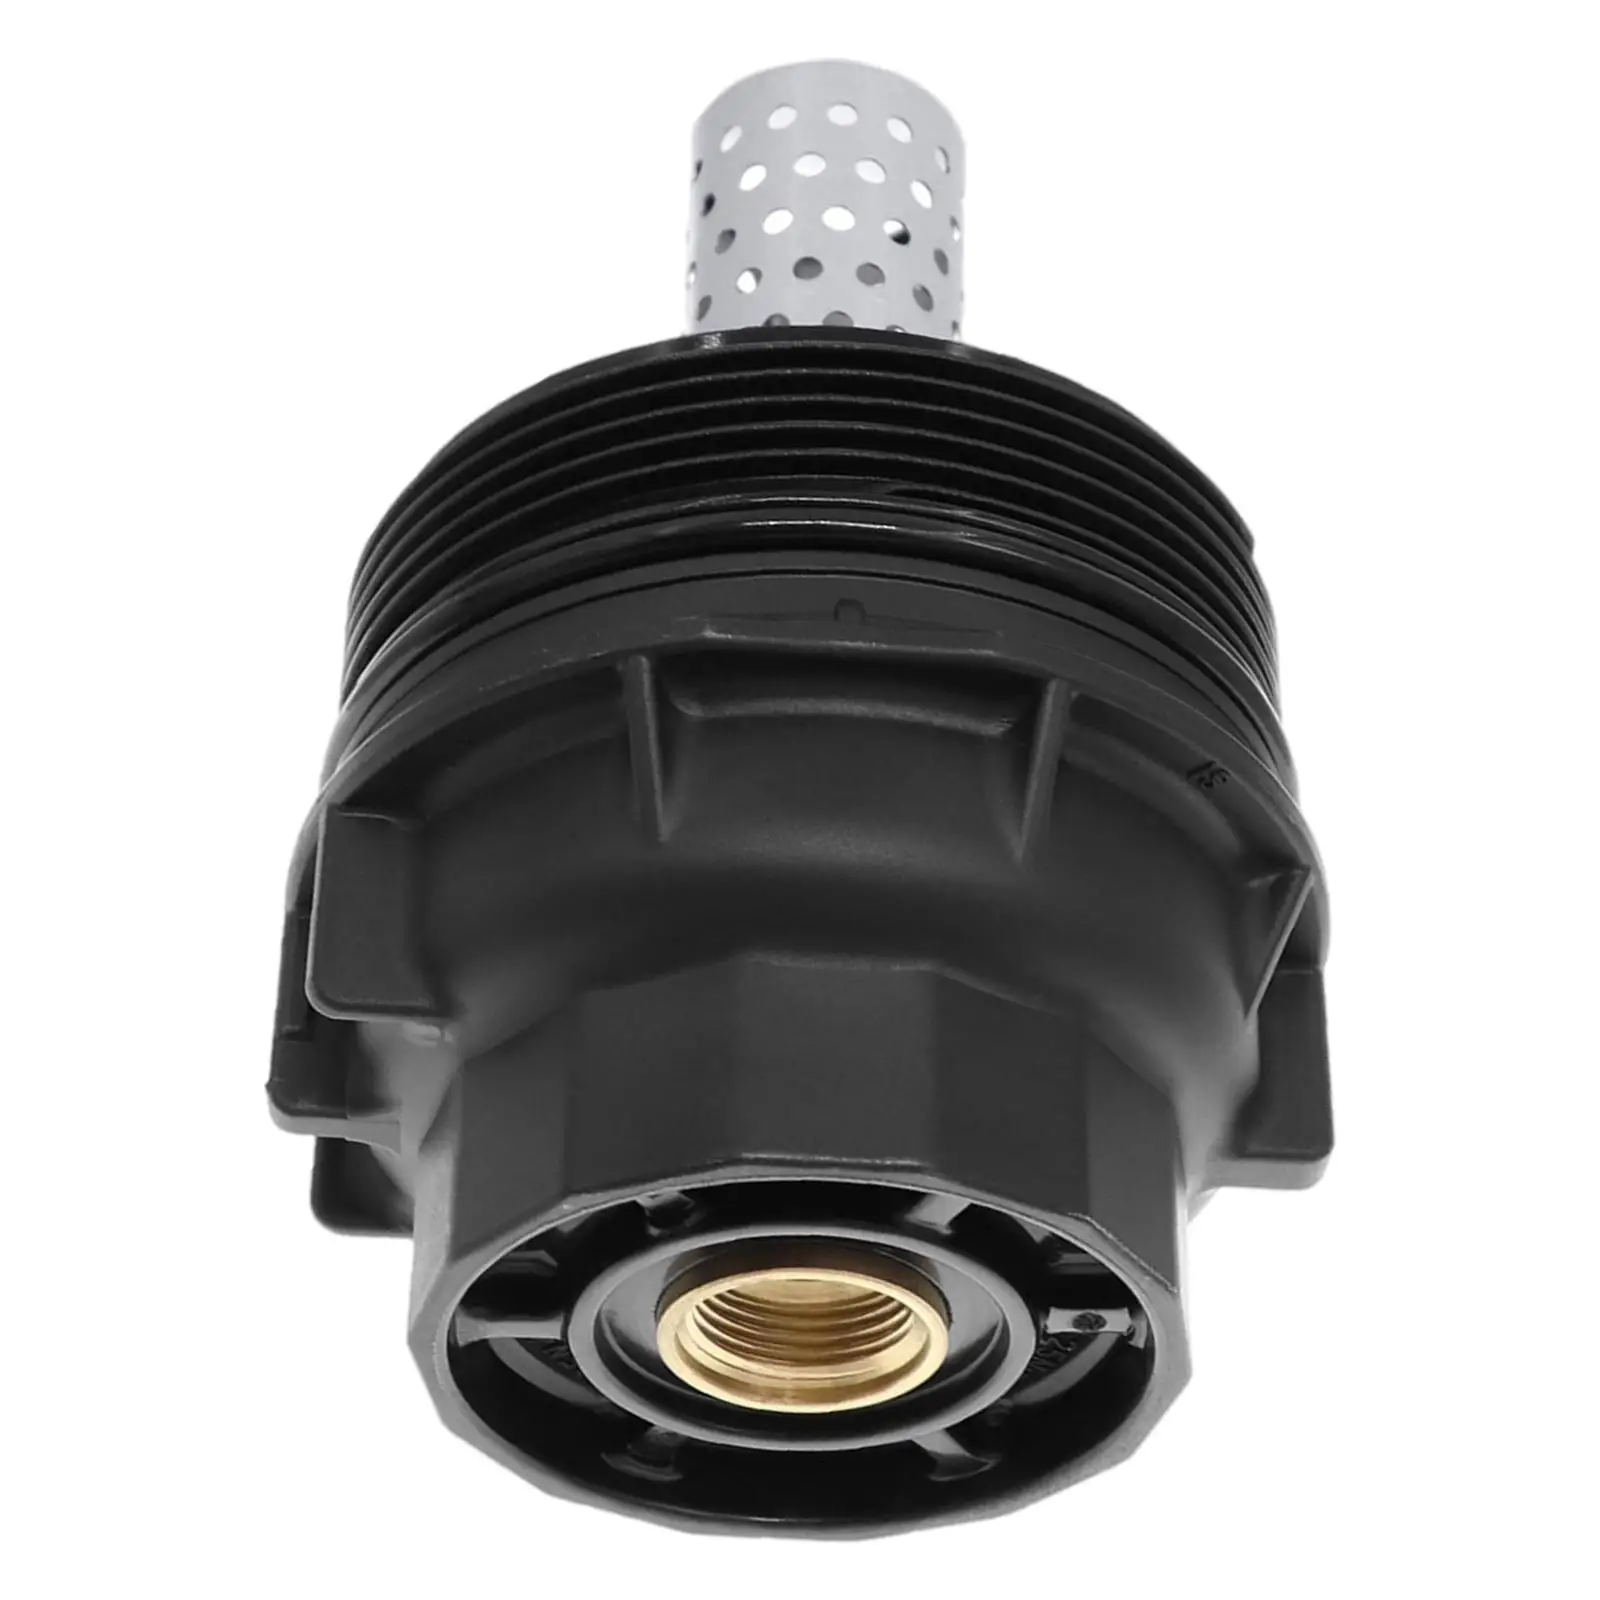 Oil Filter Housing Assembly 1562038010 with Oil Plug for Lexus 5.7L V8 2007-2013 2008-2020